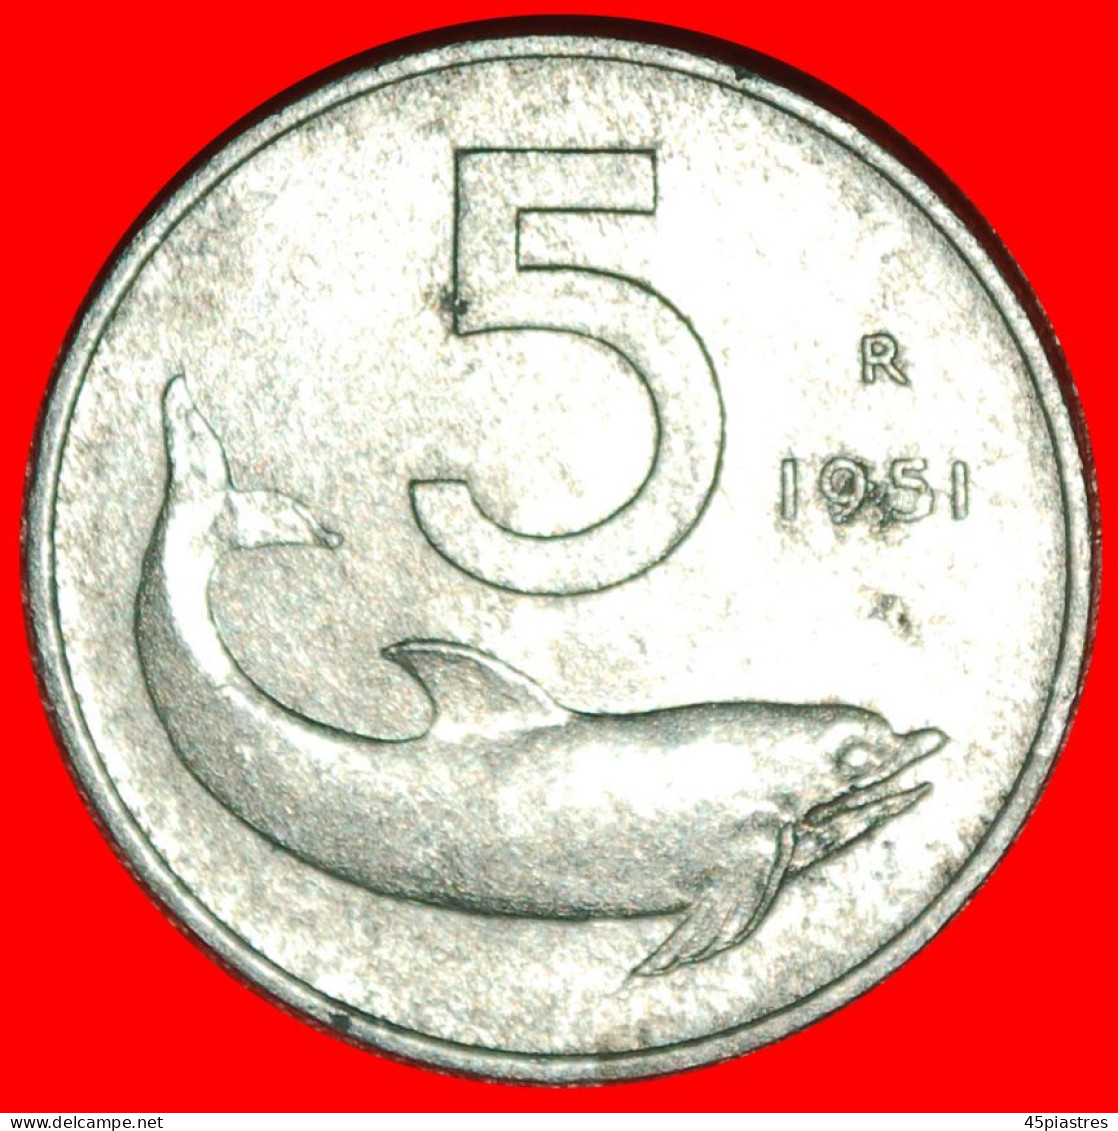 * DOLPHIN And RUDDER (1951-2001): ITALY  5 LIRAS 1951R! · LOW START ·  NO RESERVE! - 5 Lire